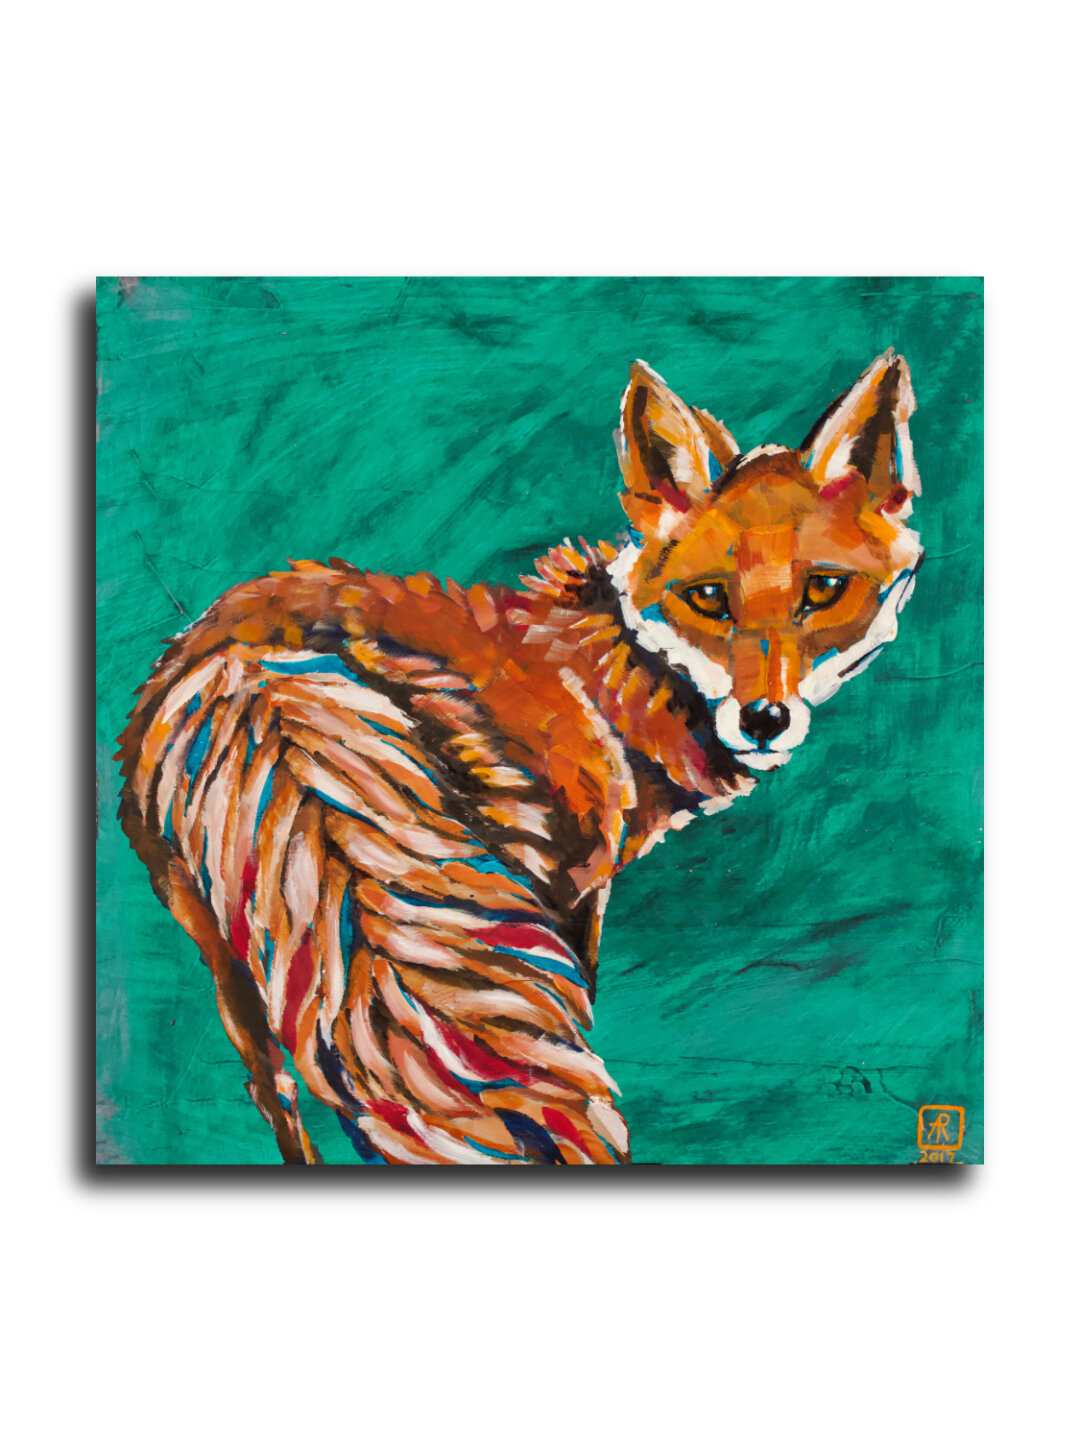 Green Fox by Ann Richmond - A beautiful Fine-Art Print of a turning Red Fox. Limited inventory remains in our Print Sale...